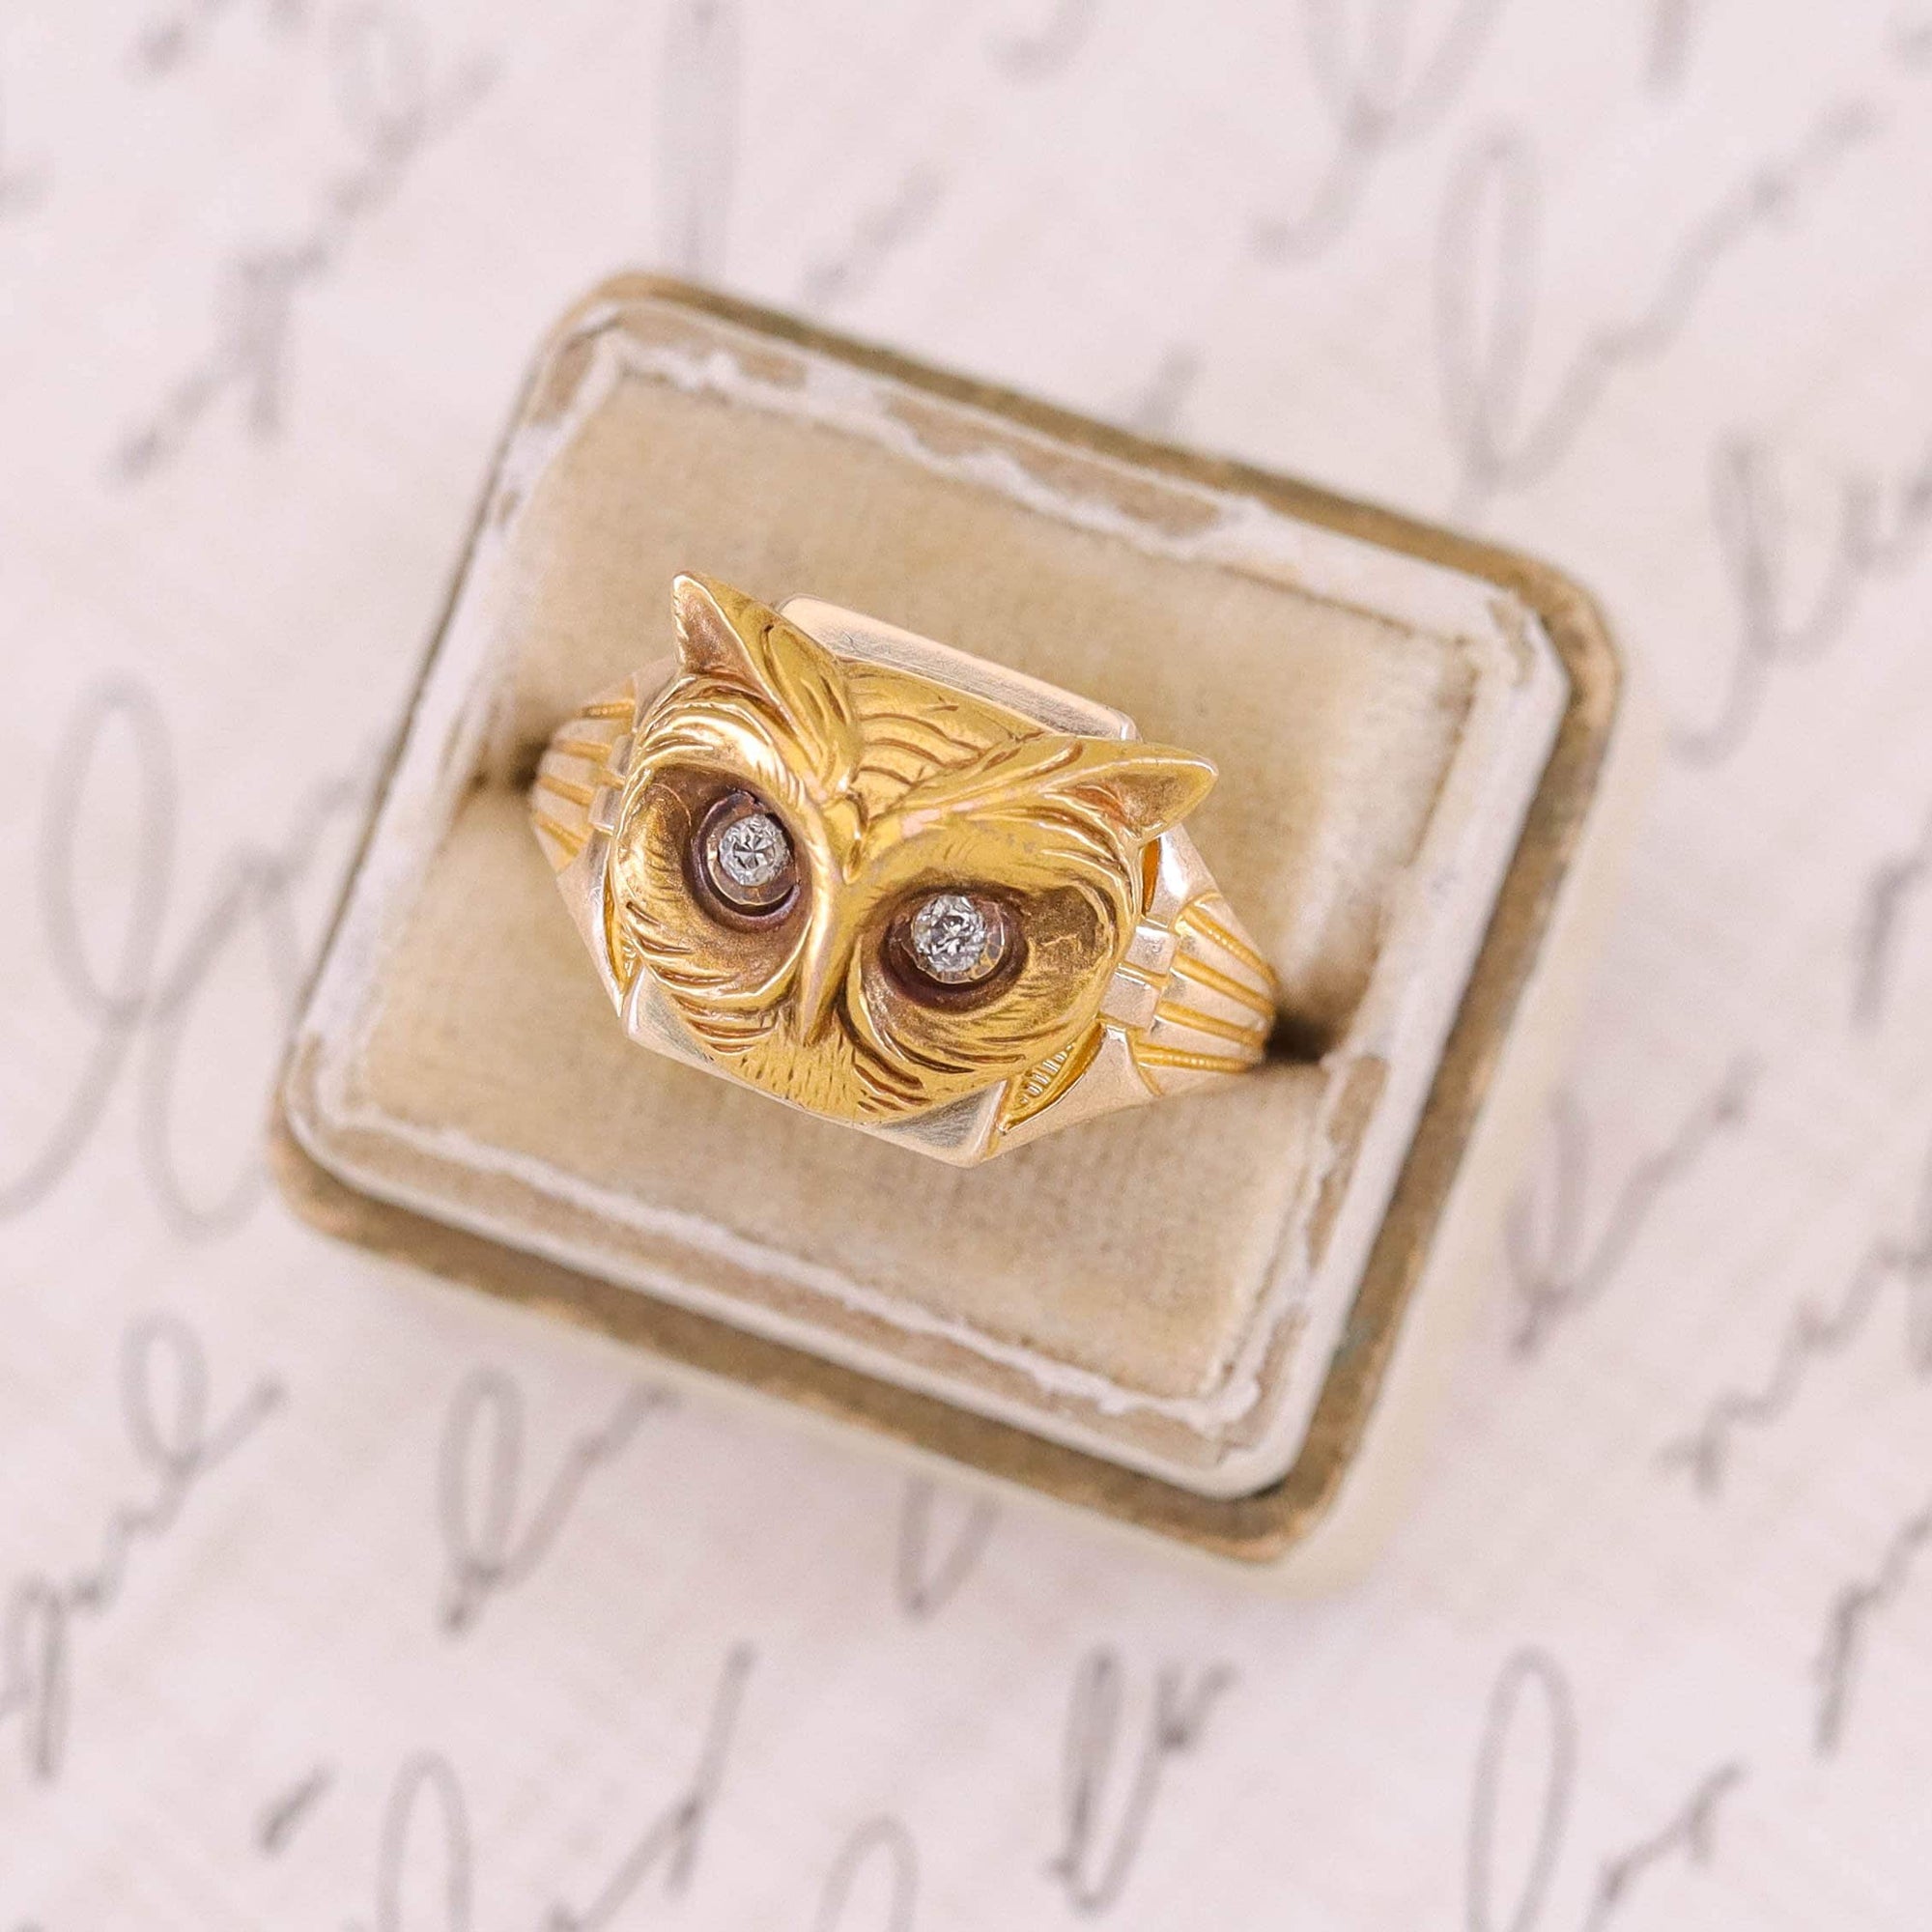 Antique Owl Conversion Ring of 10k Gold